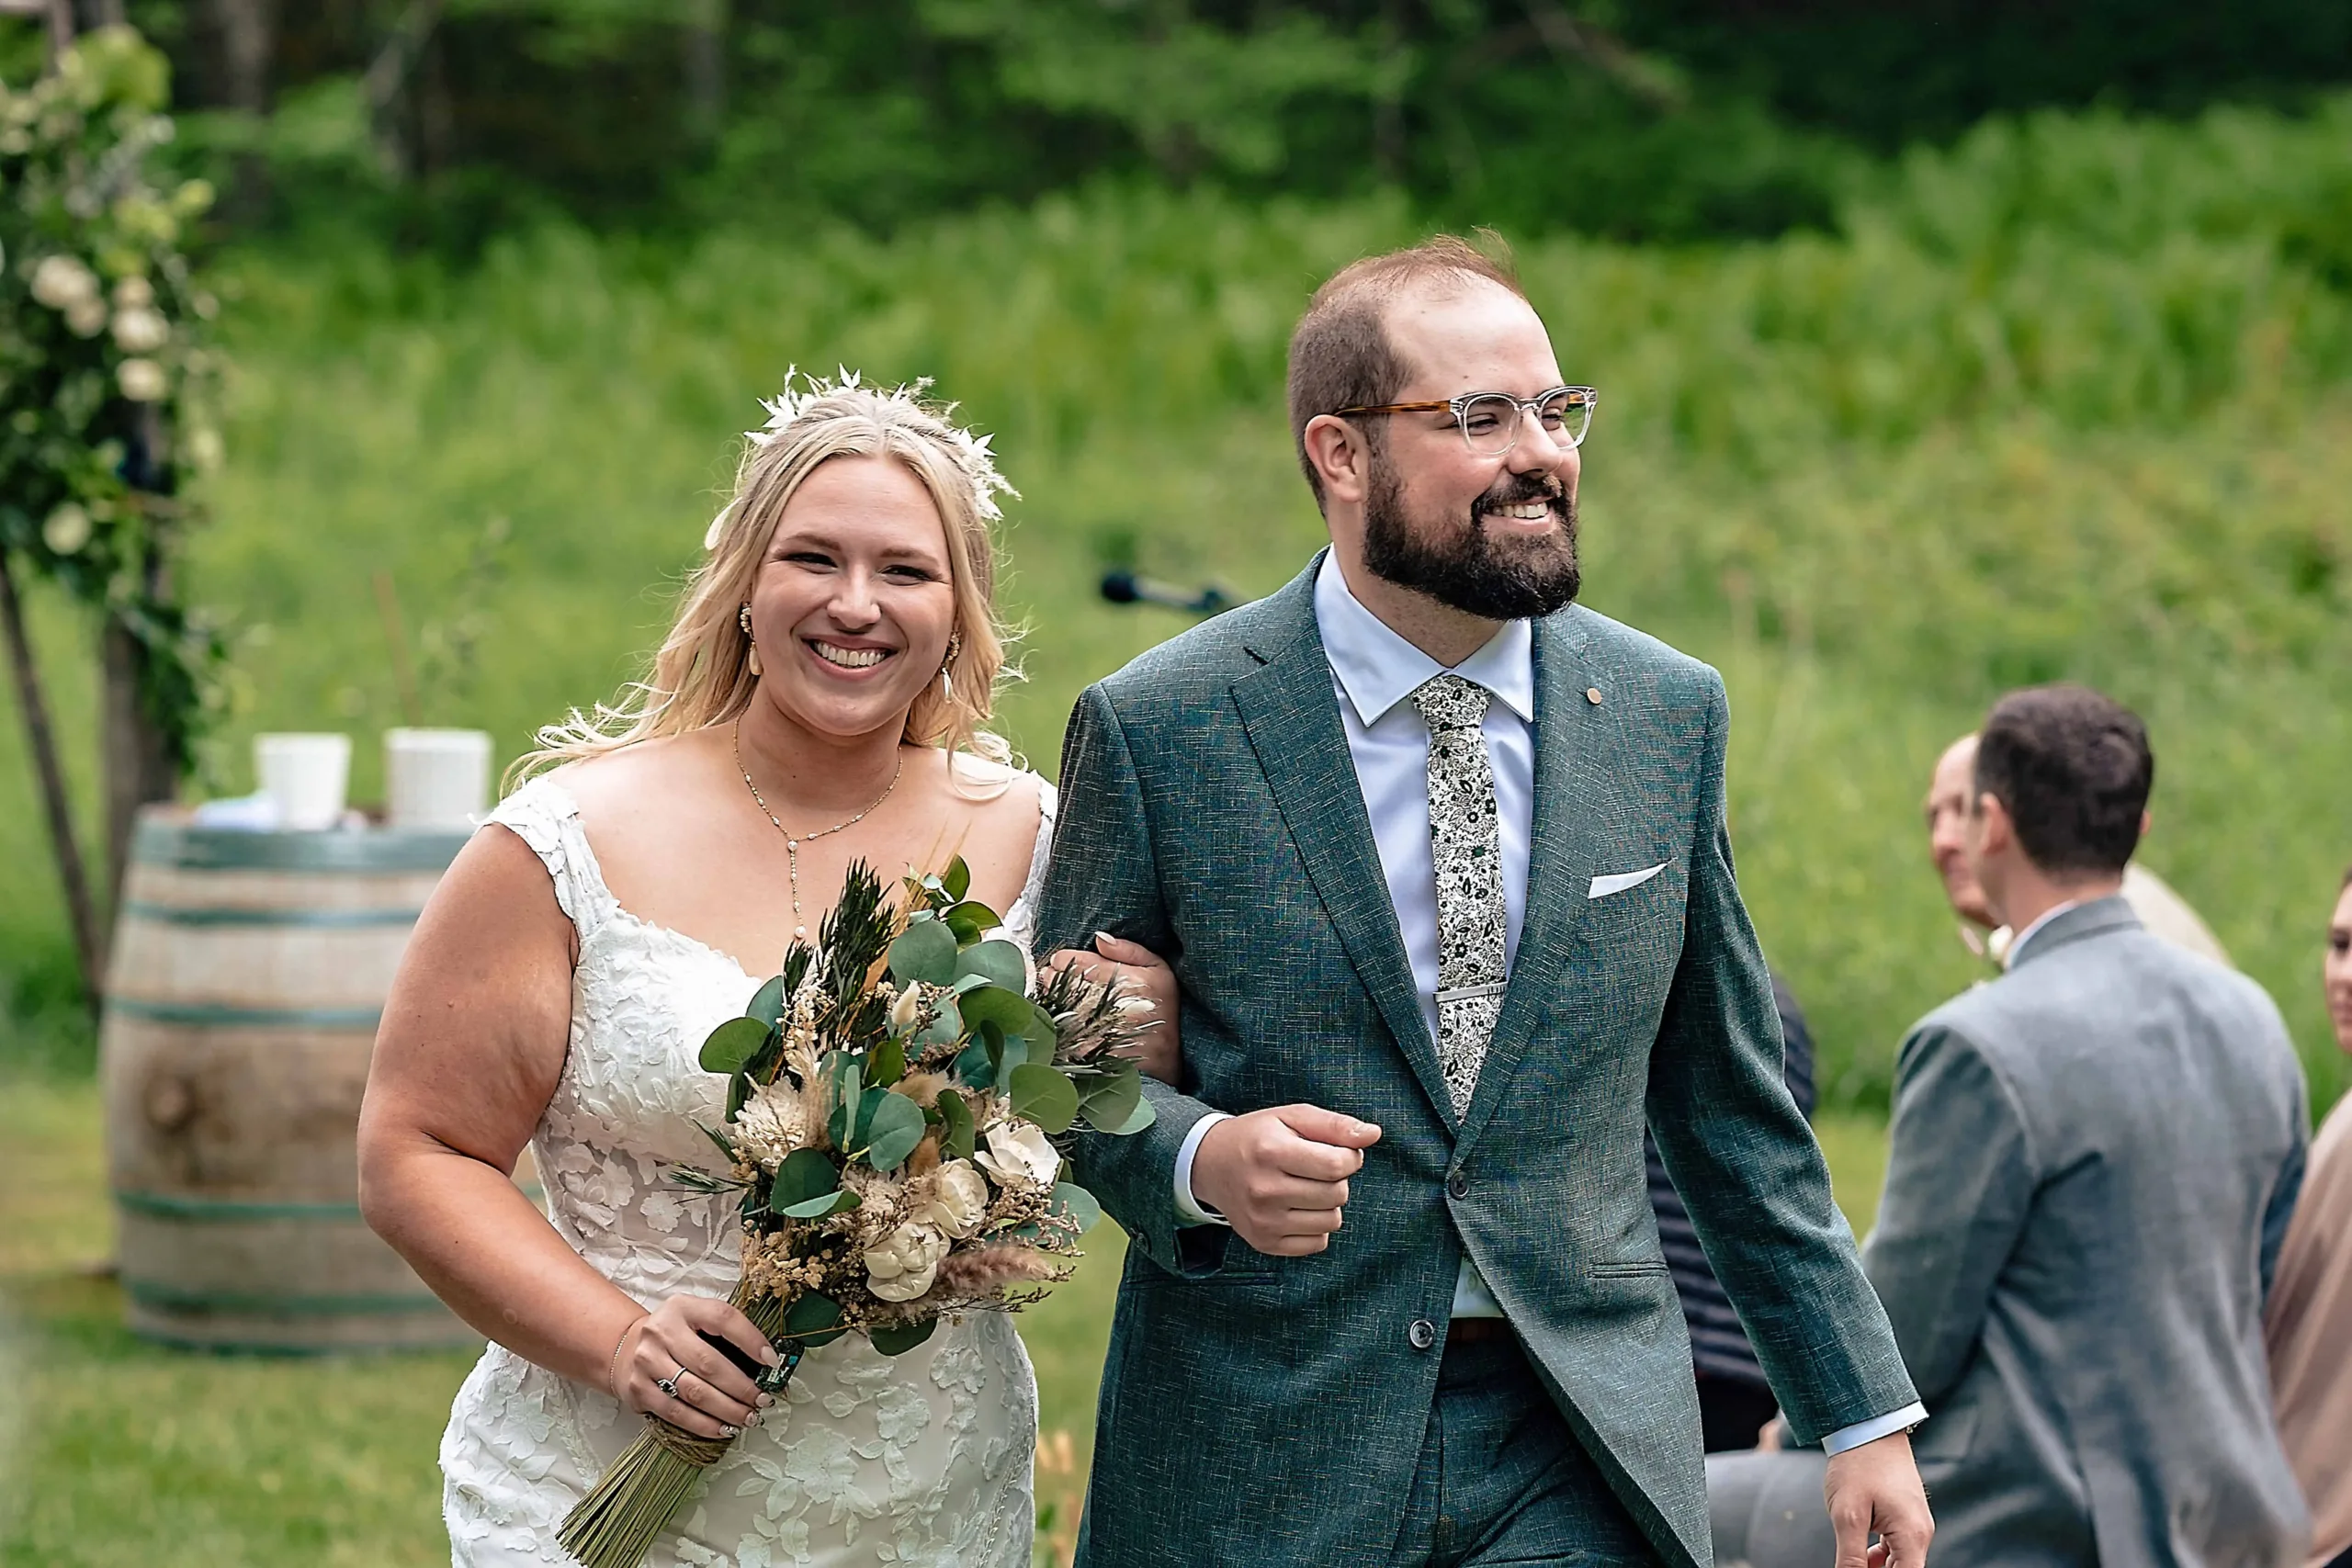 A smiling couple in wedding attire walk together outdoors in Connecticut; the bride in a lace dress with a floral bouquet and the groom in a green tweed suit.